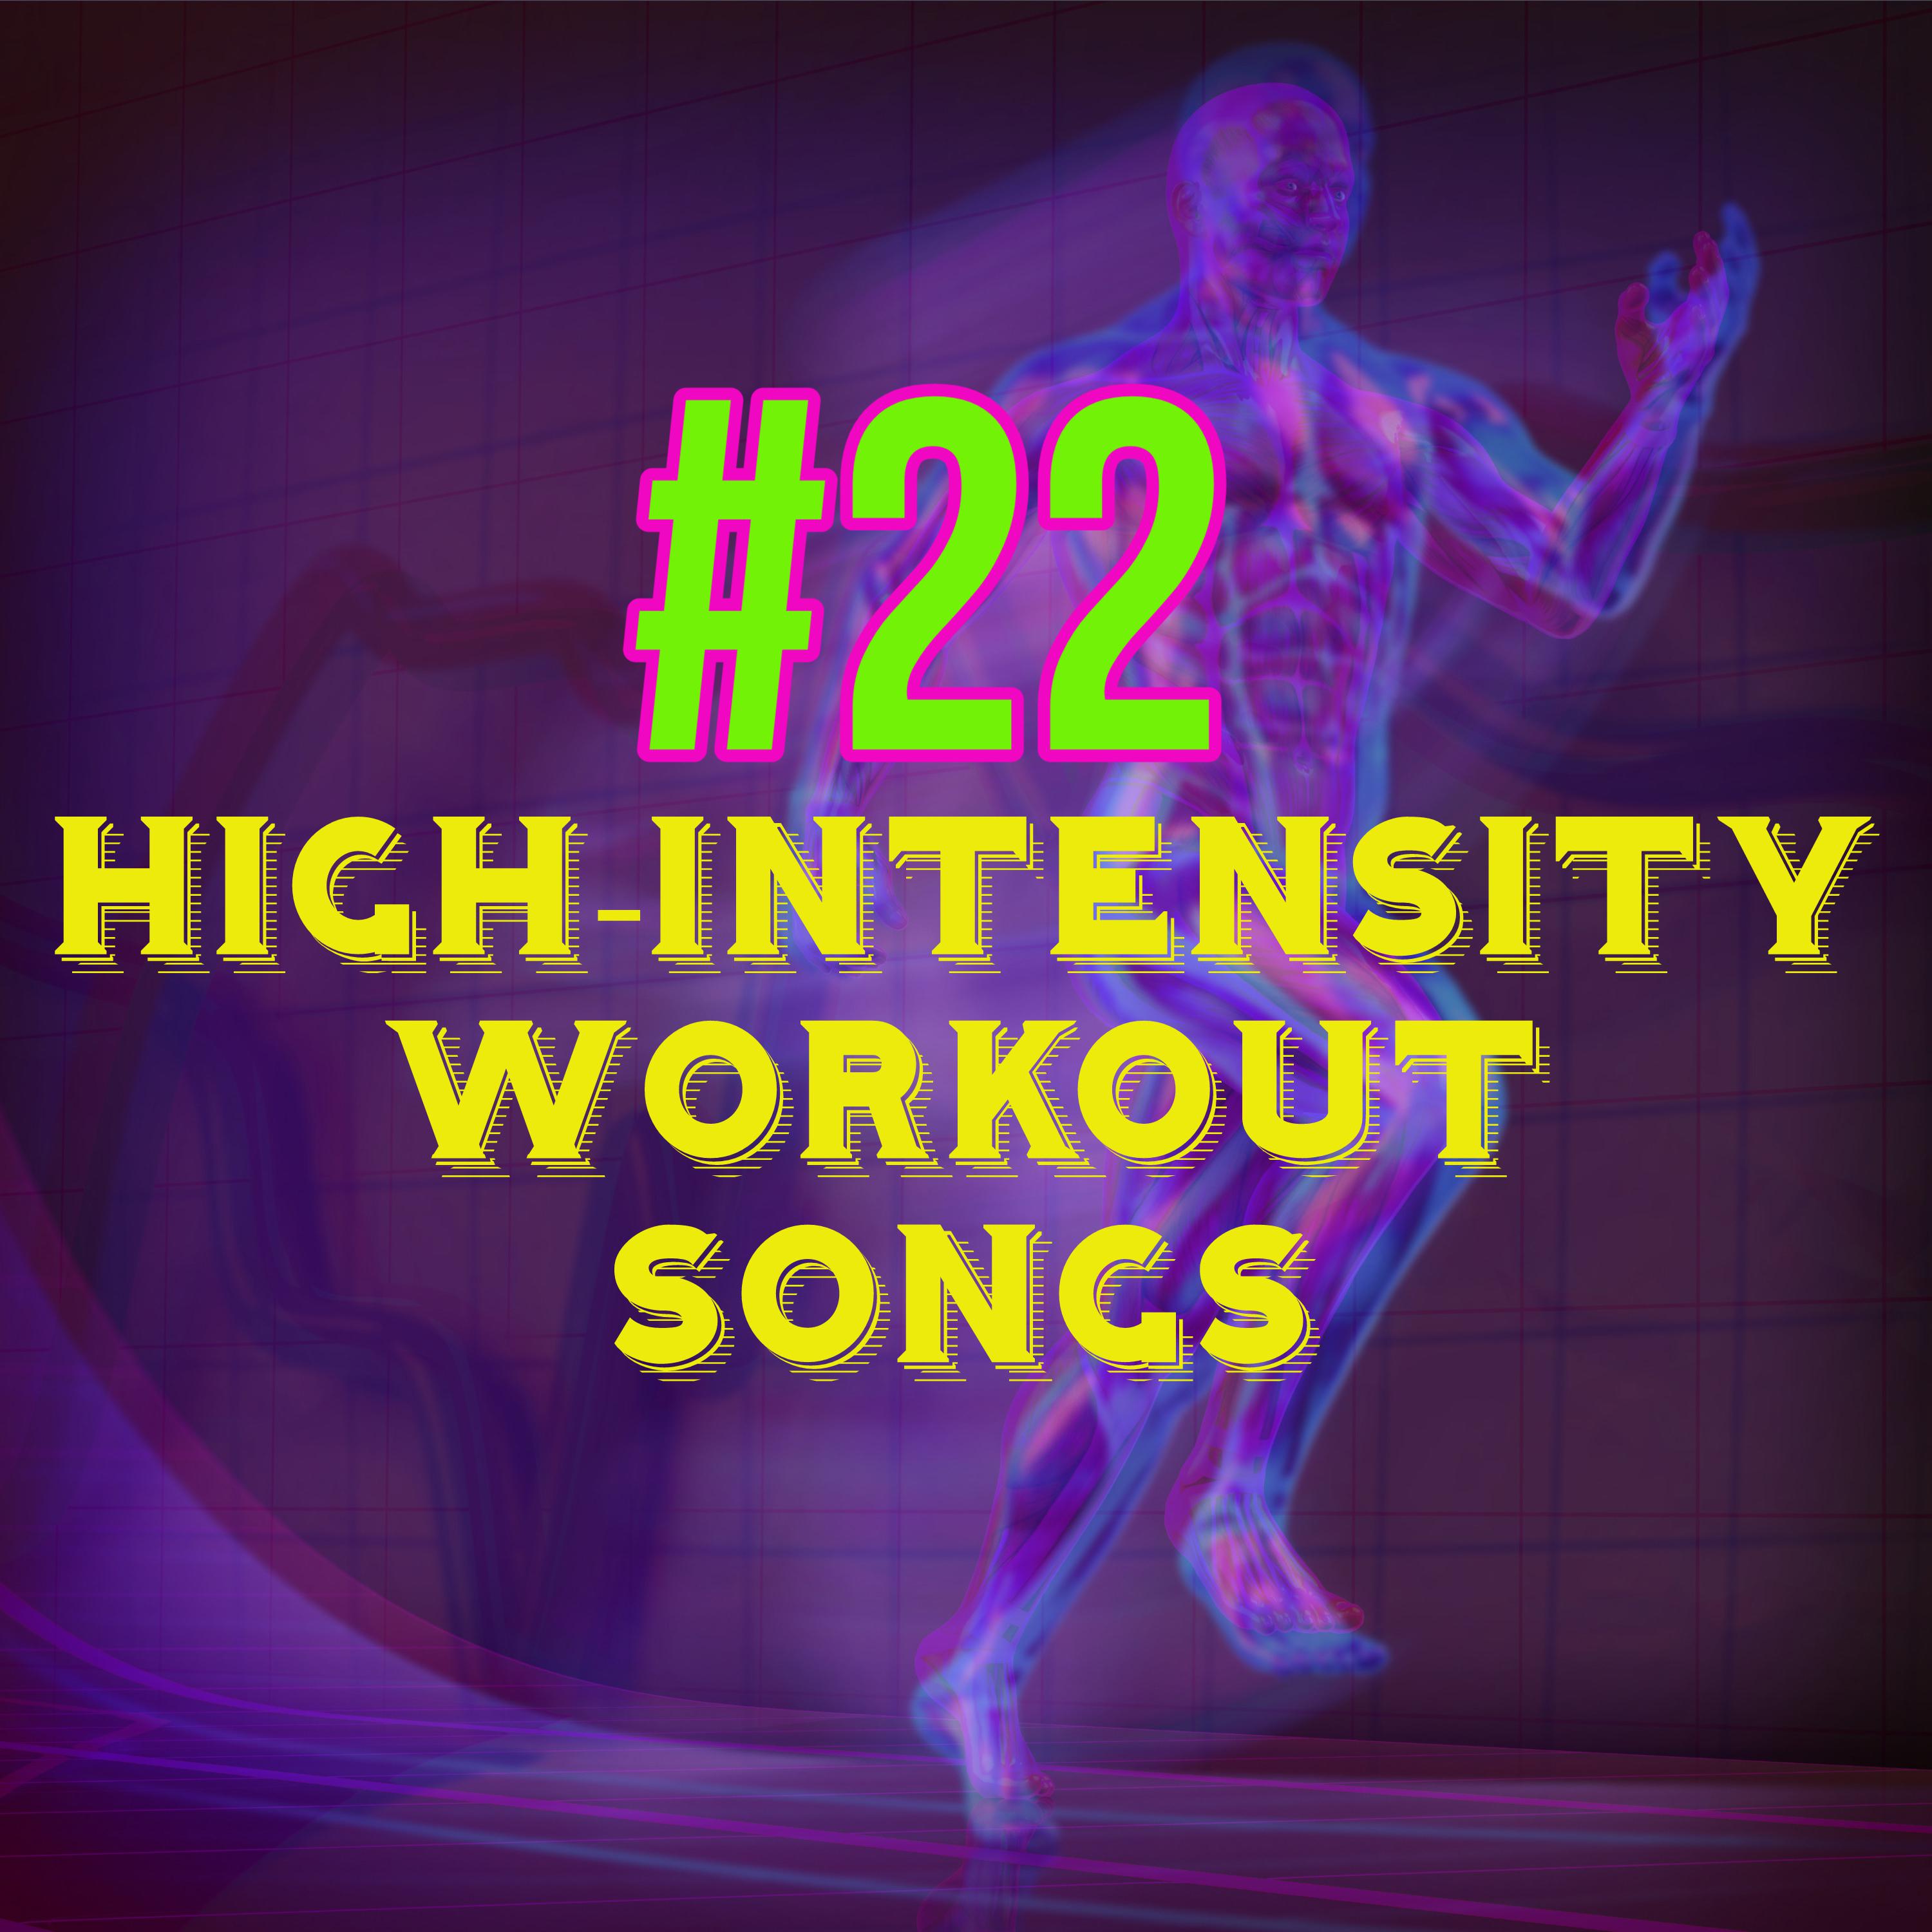 #22 High-intensity Workout Songs – Metabolism Booster Cardio HIIT High-intensity Interval Training Best Workout Music House EDM for Fitness